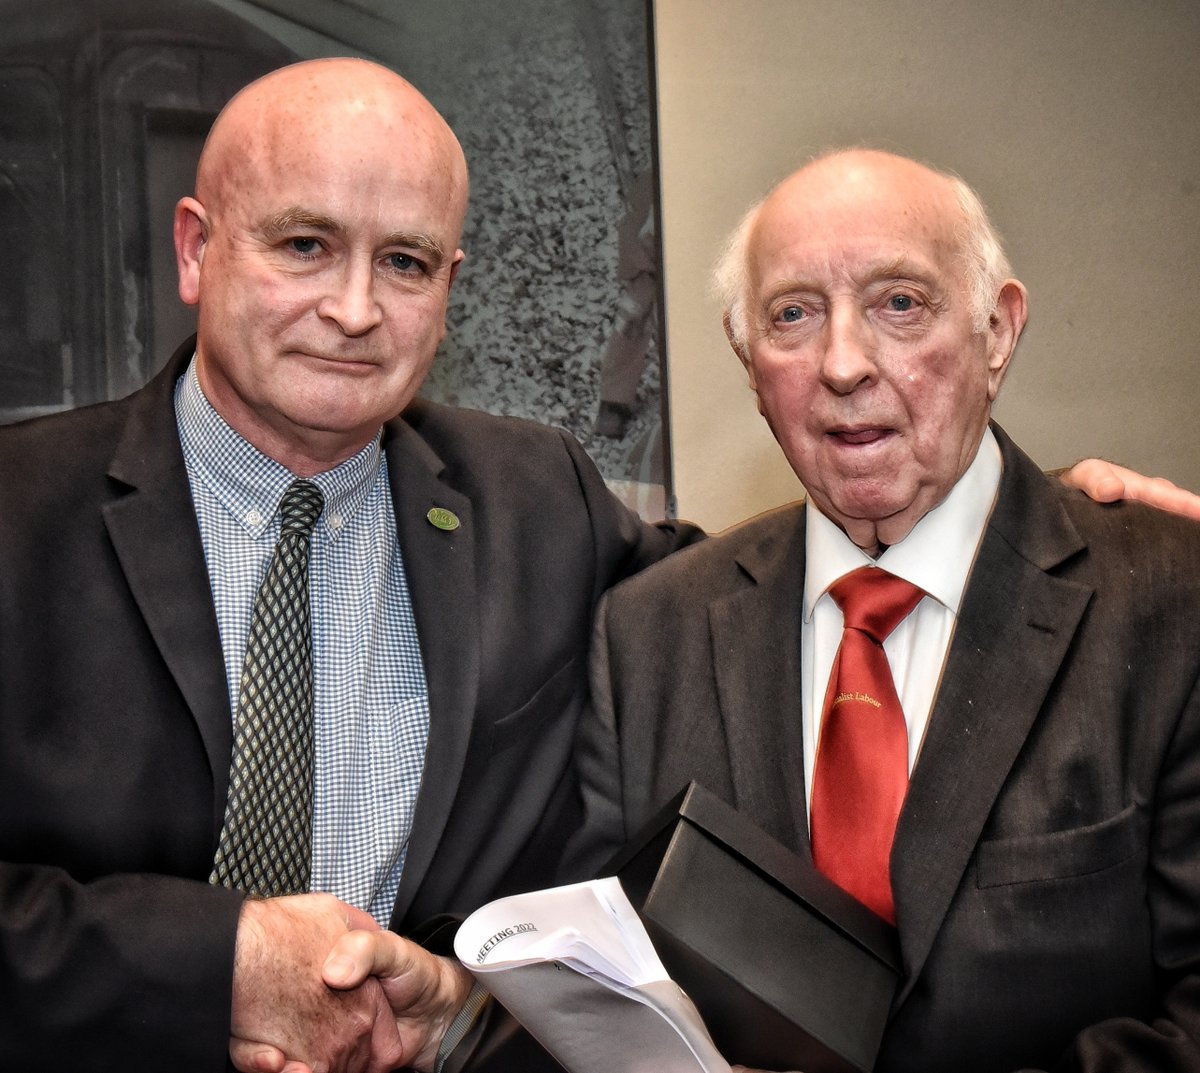 Arthur Scargill with Mick Lynch at the opening of the 2022 @RMTunion AGM yesterday.